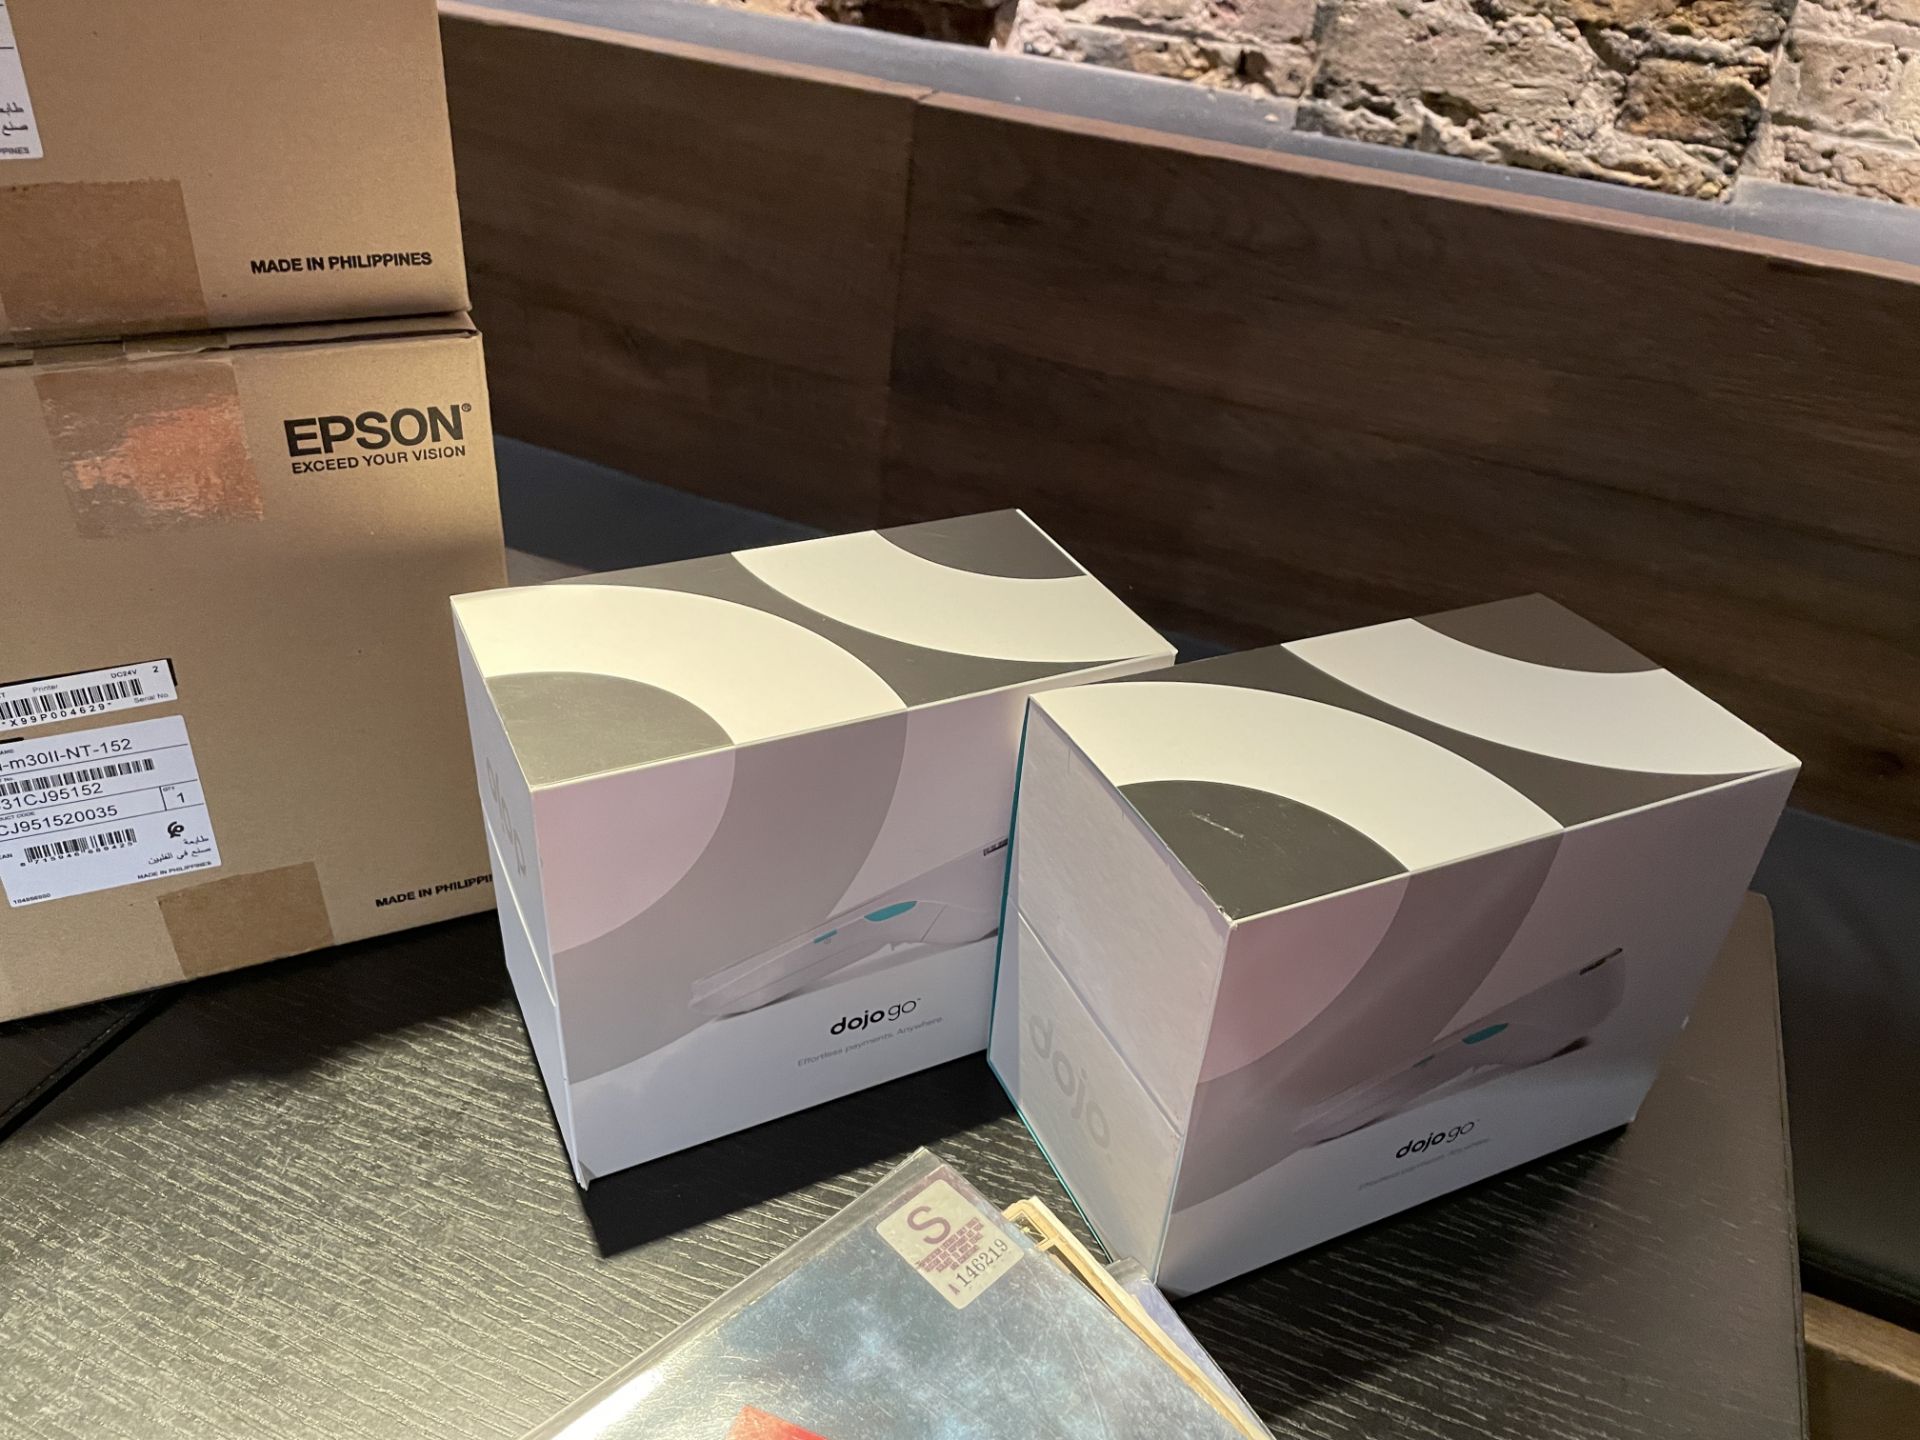 3 x Epson TM-M30II Thermal POS Printers For Apple Devices and 2 x DoJo Go A920 Payment Terminals - Image 3 of 11